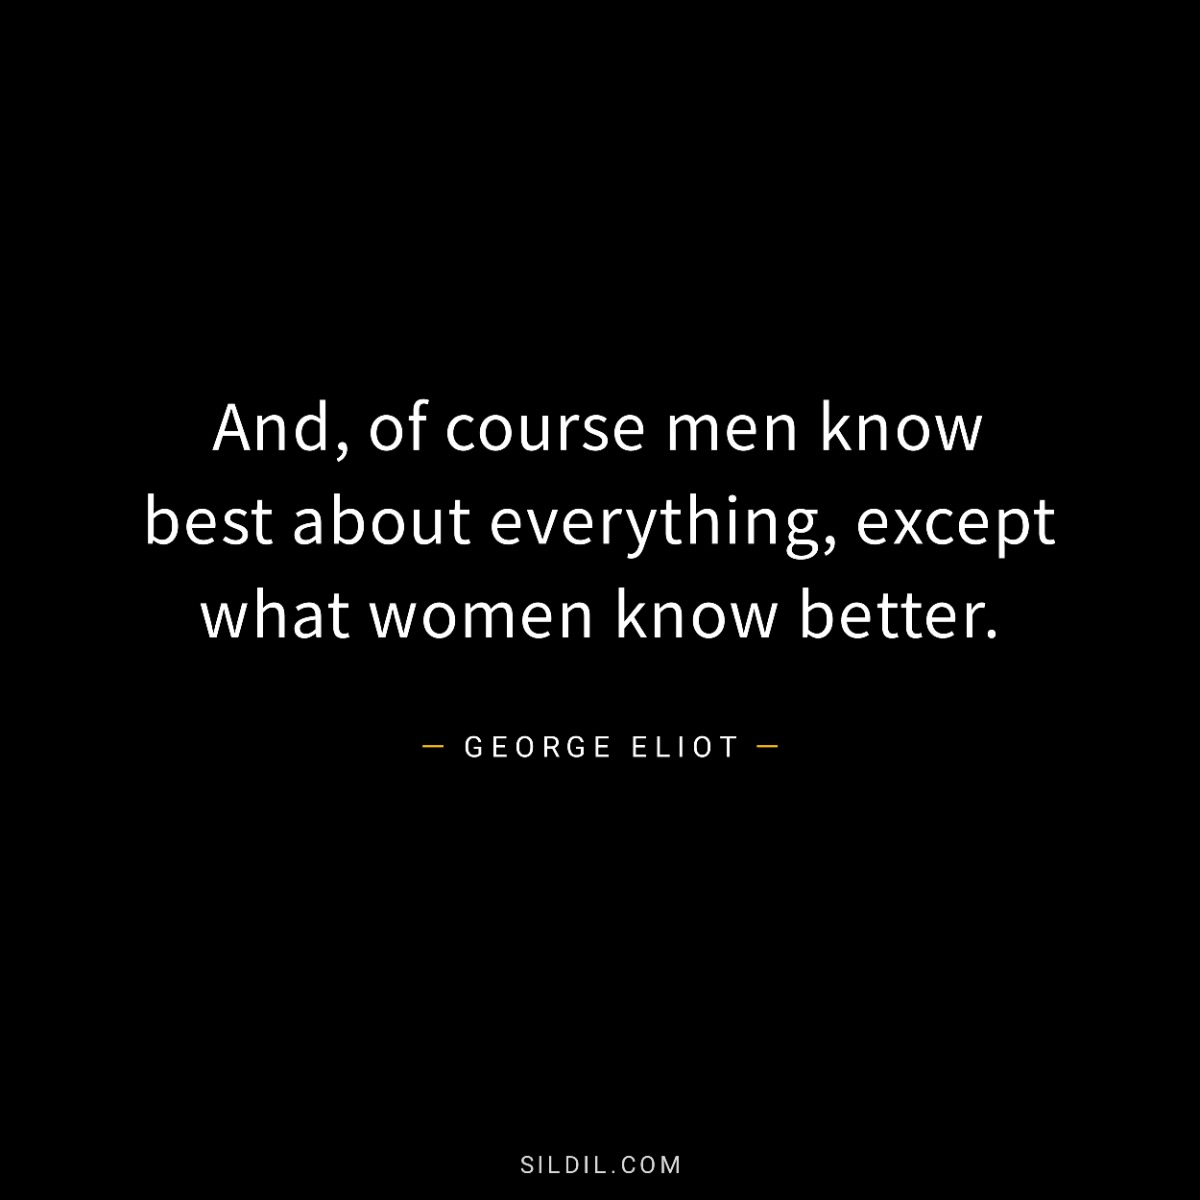 And, of course men know best about everything, except what women know better.